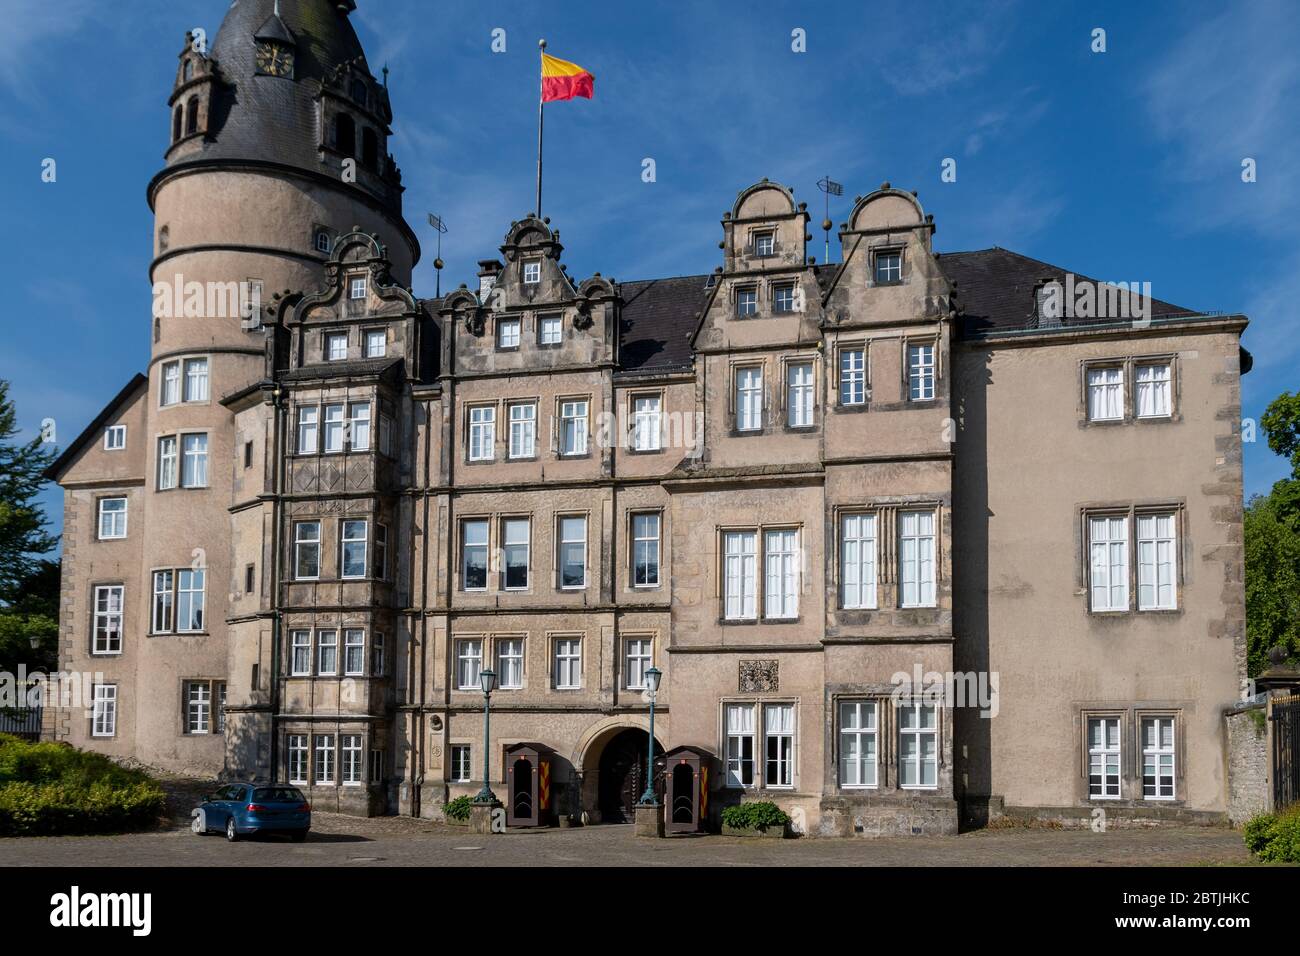 The Princely Residence Castle in Detmold Stock Photo